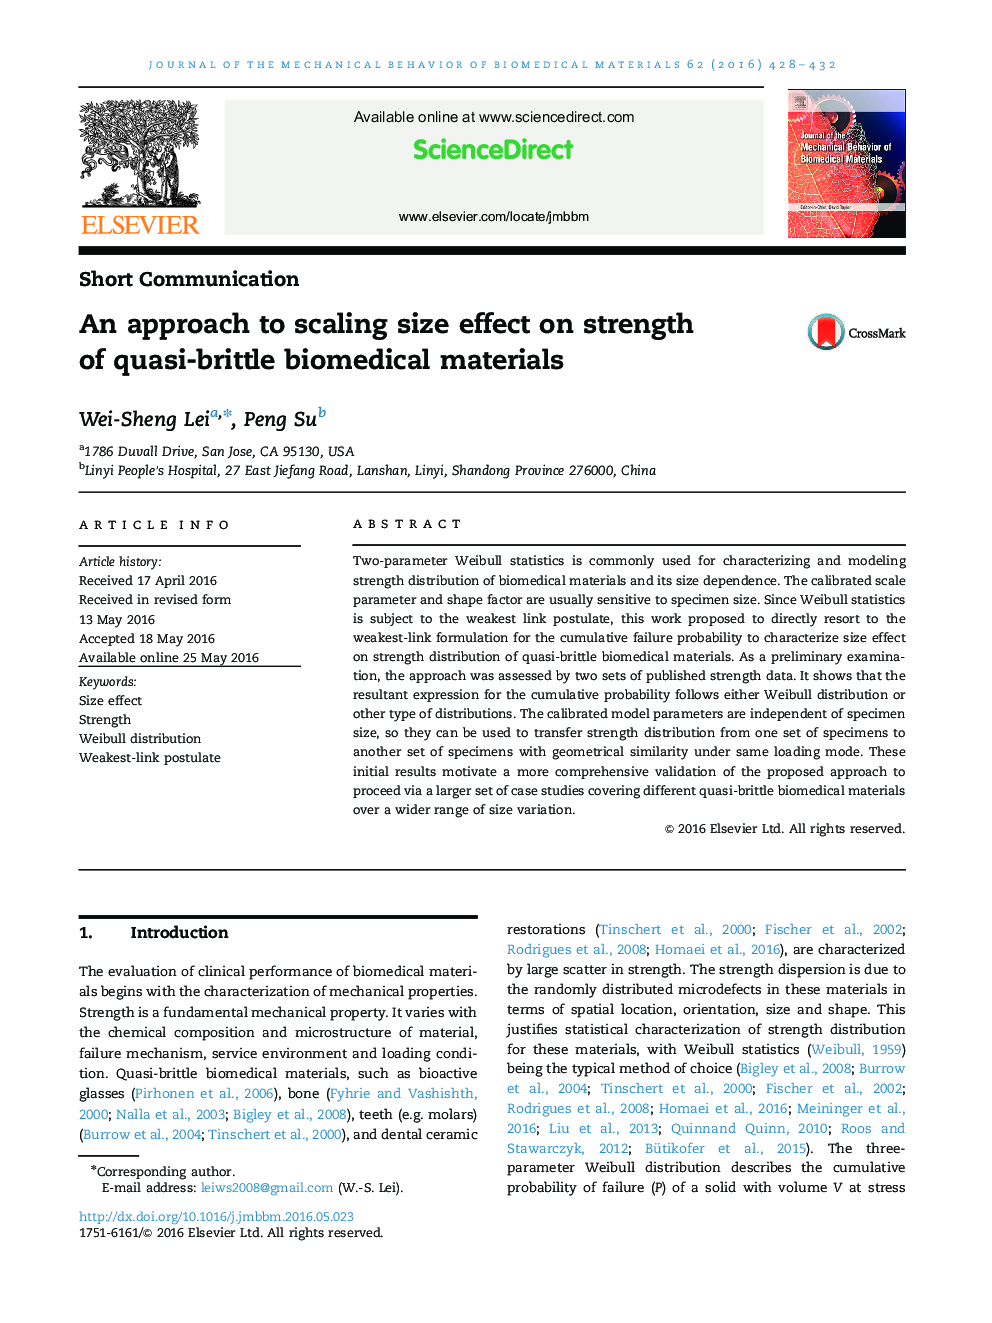 An approach to scaling size effect on strength of quasi-brittle biomedical materials